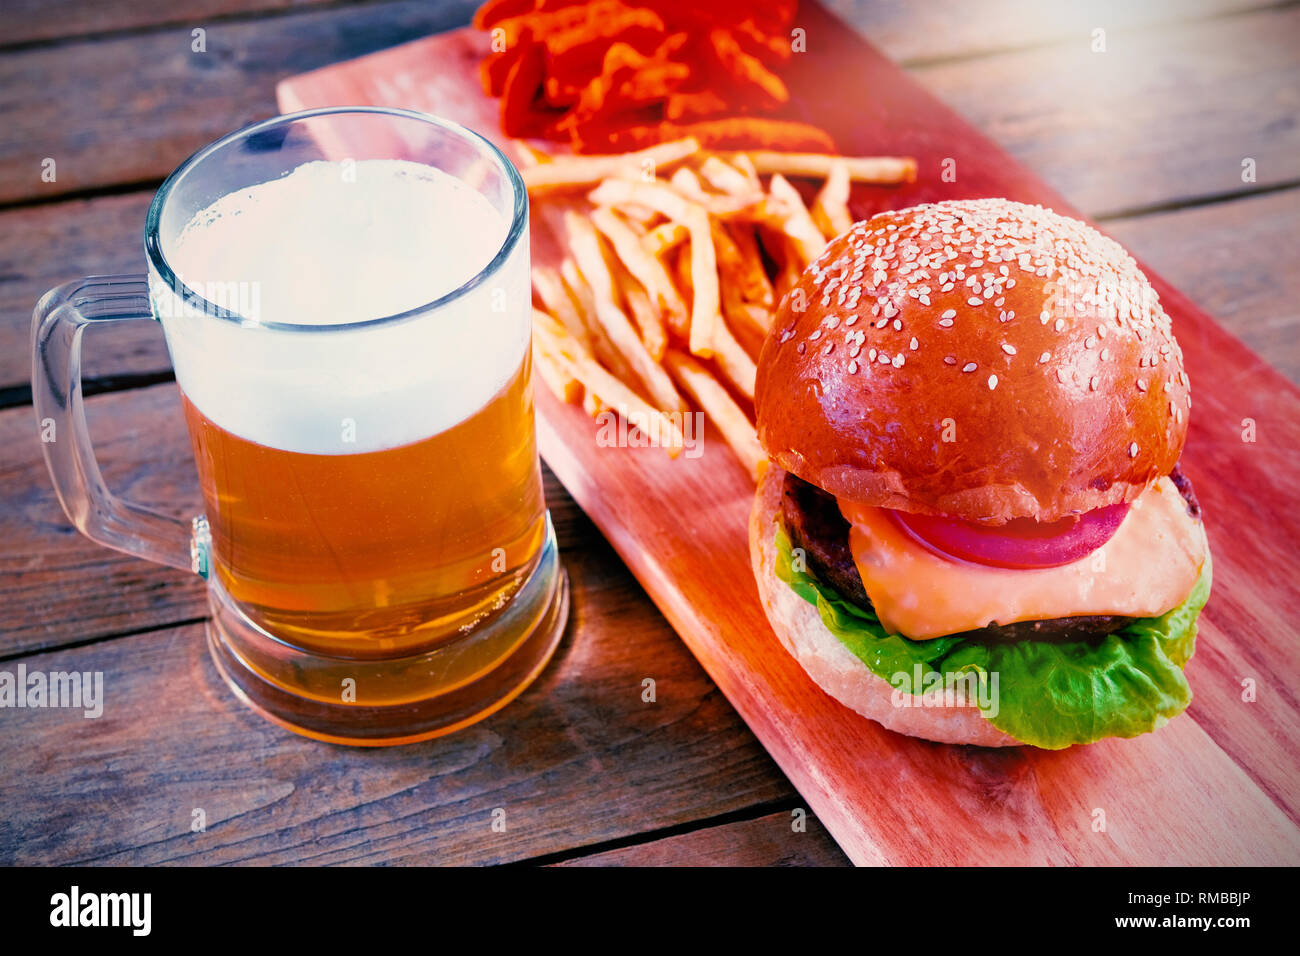 Beer mug, burger and fries on wooden table Stock Photo